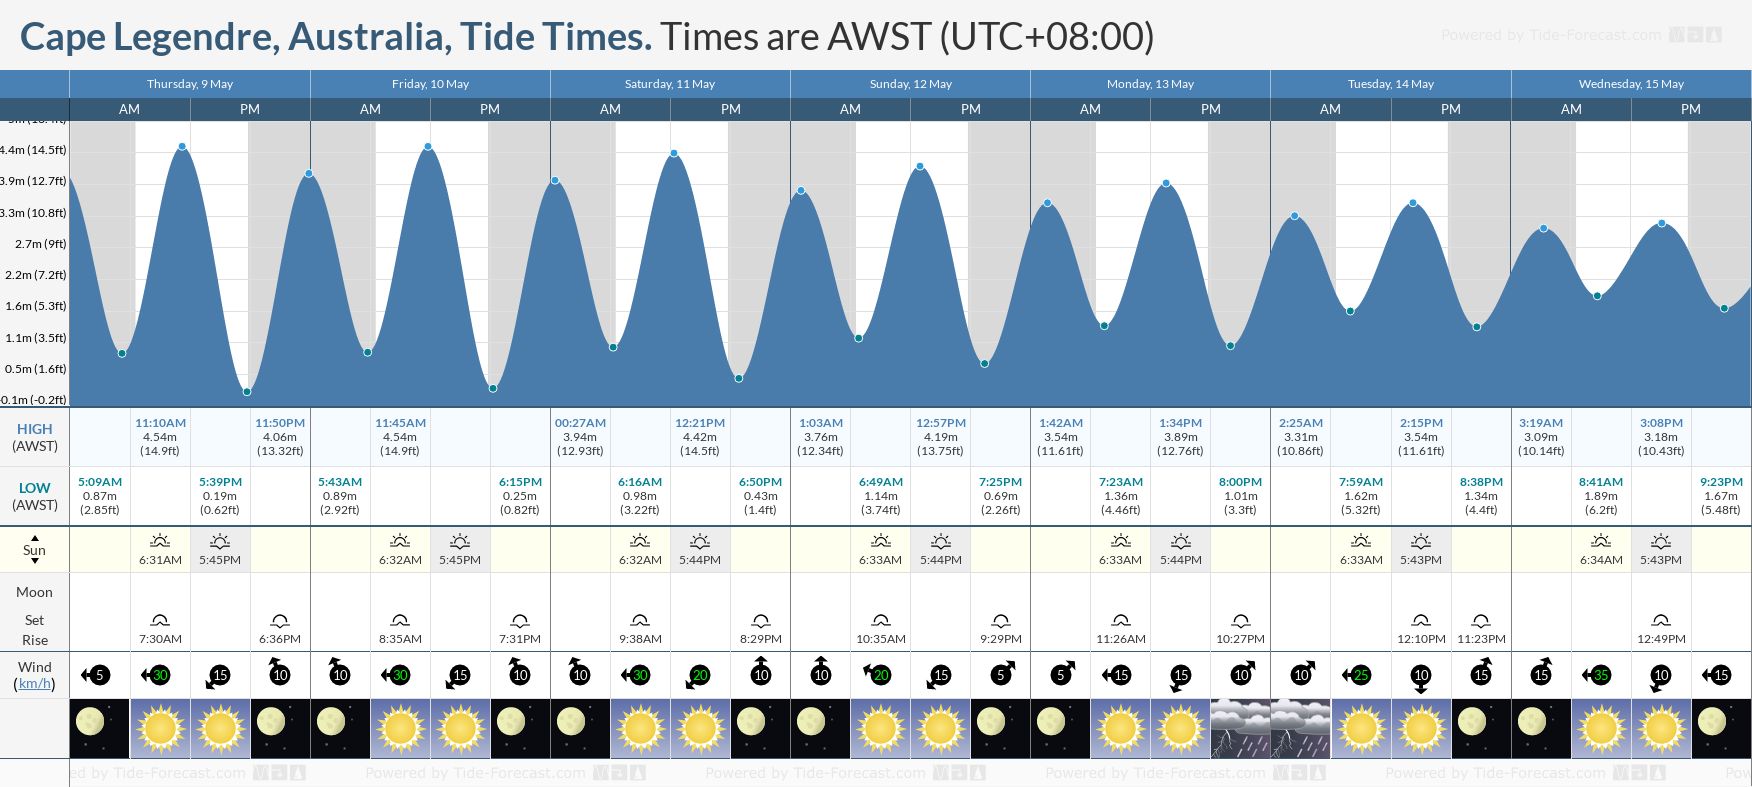 Cape Legendre, Australia Tide Chart including high and low tide tide times for the next 7 days